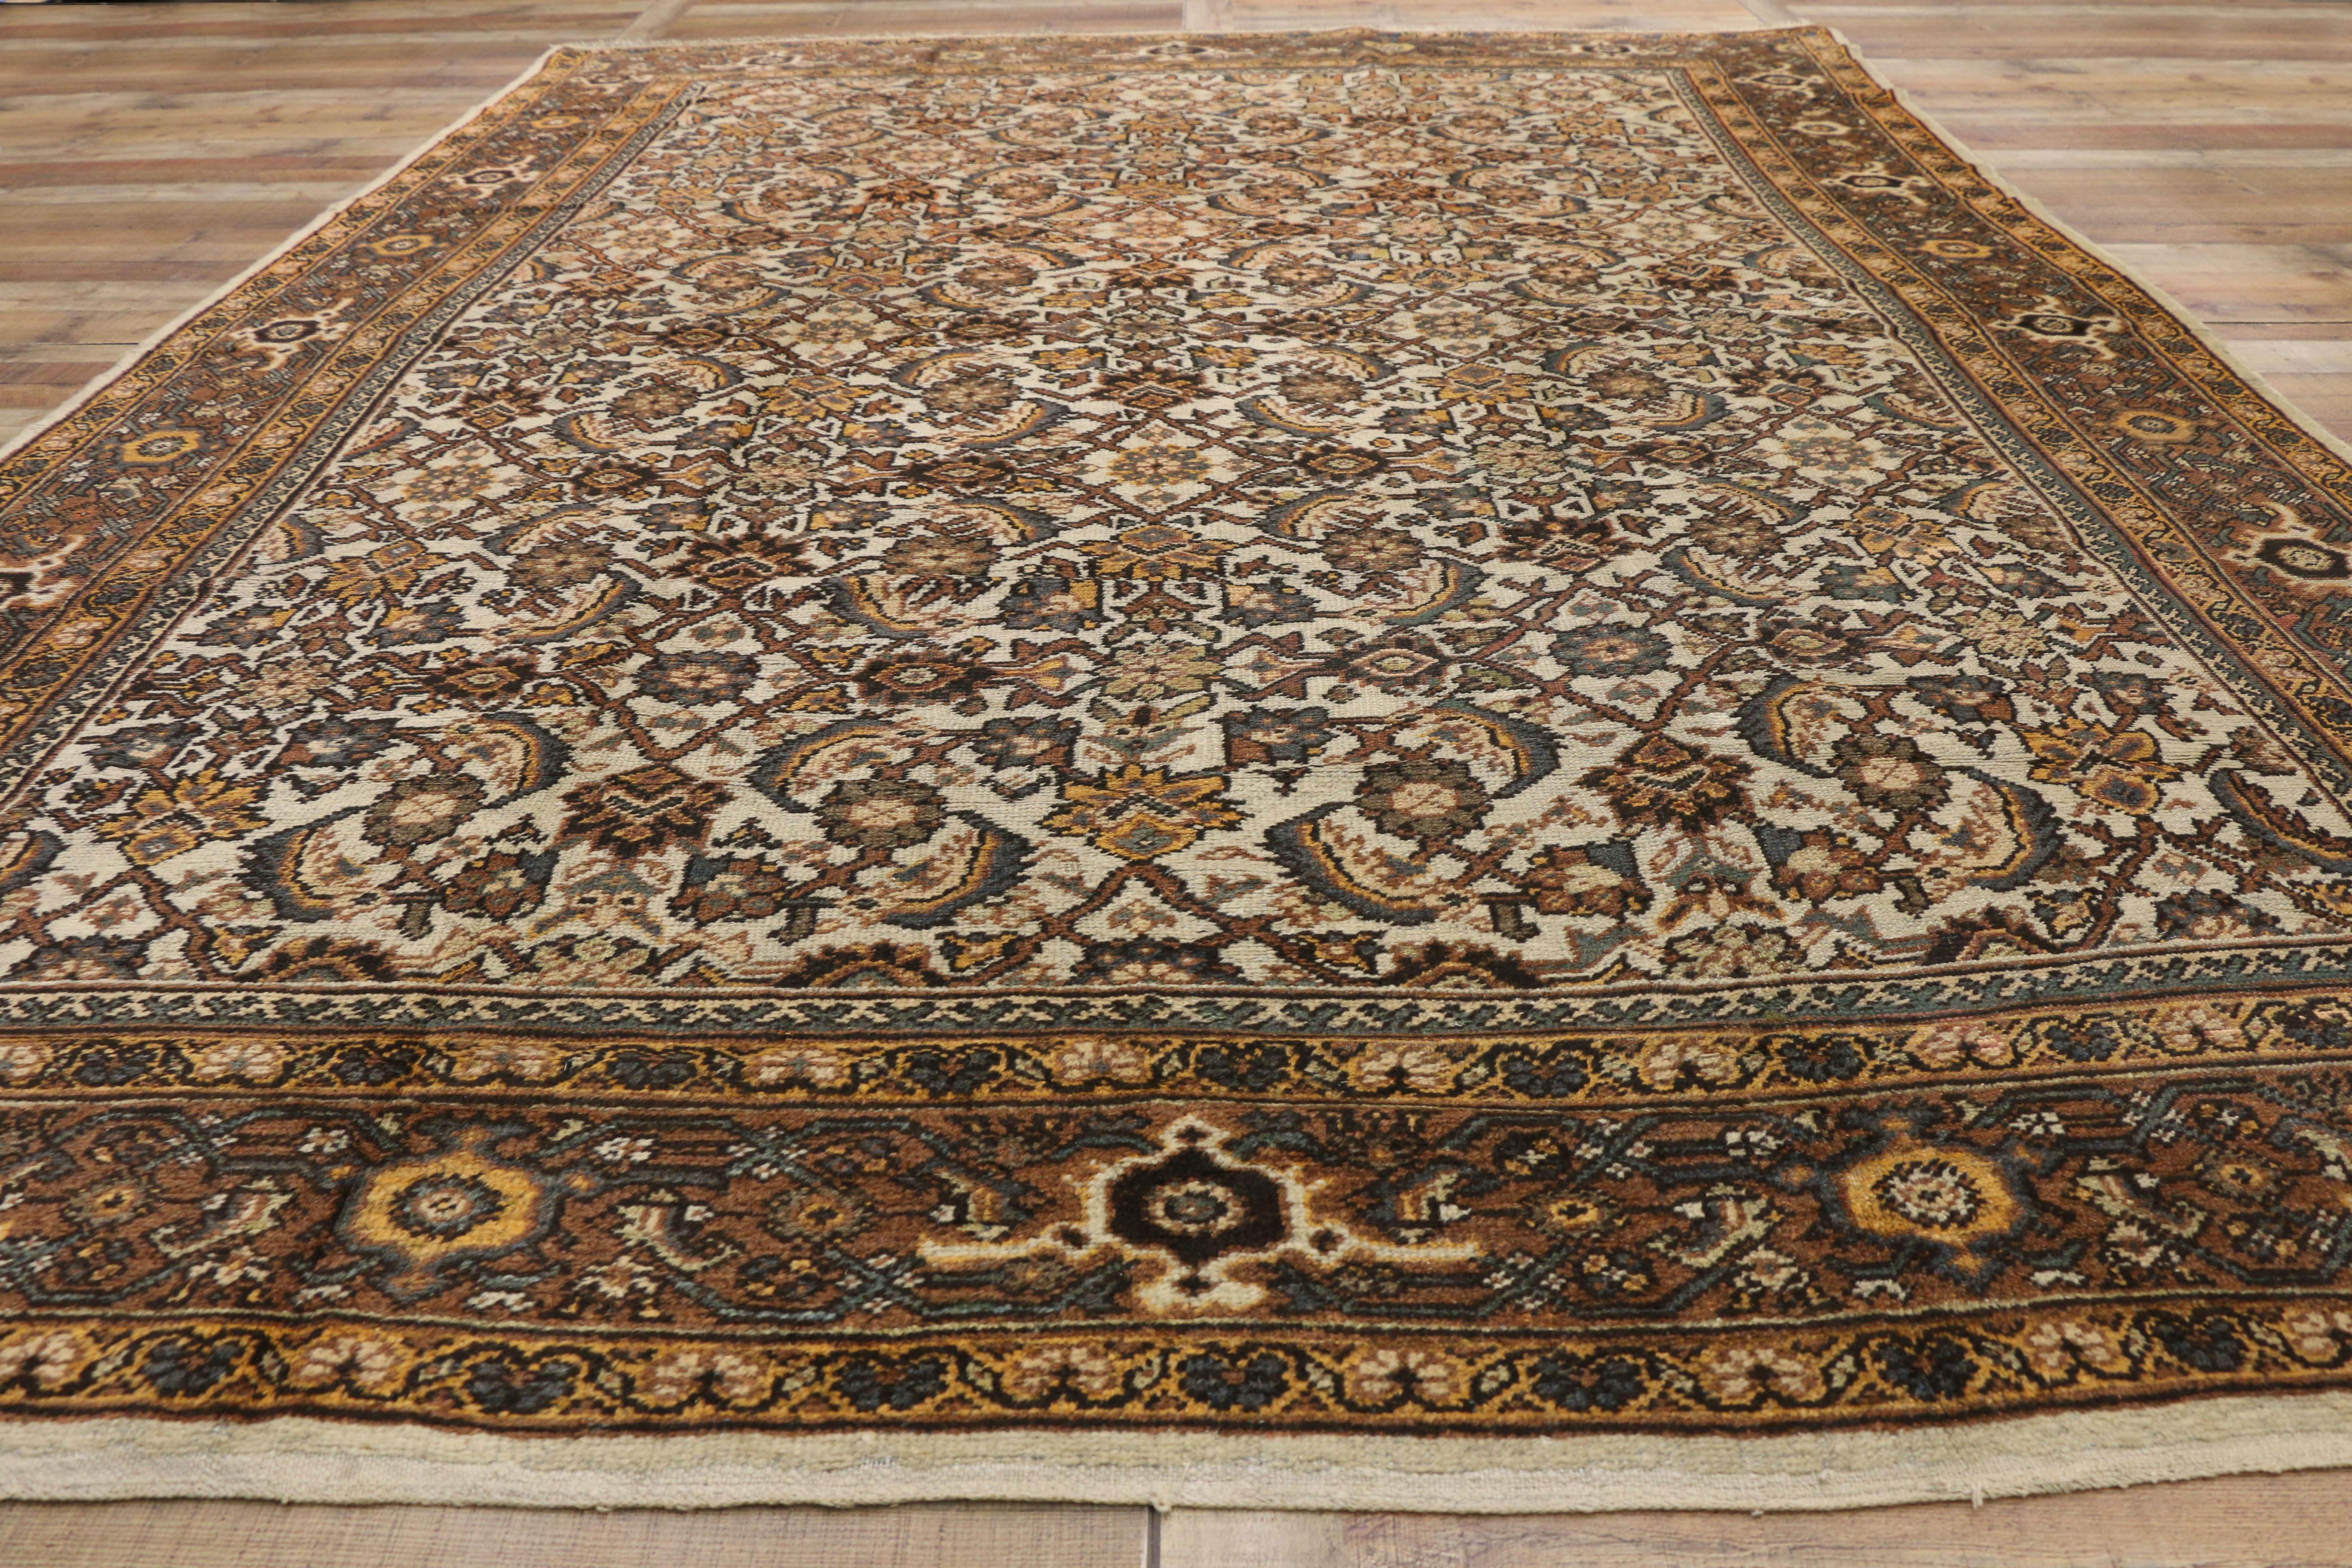 Antique Persian Mahal Rug with Herati Pattern and Rustic Arts & Crafts Style In Good Condition For Sale In Dallas, TX